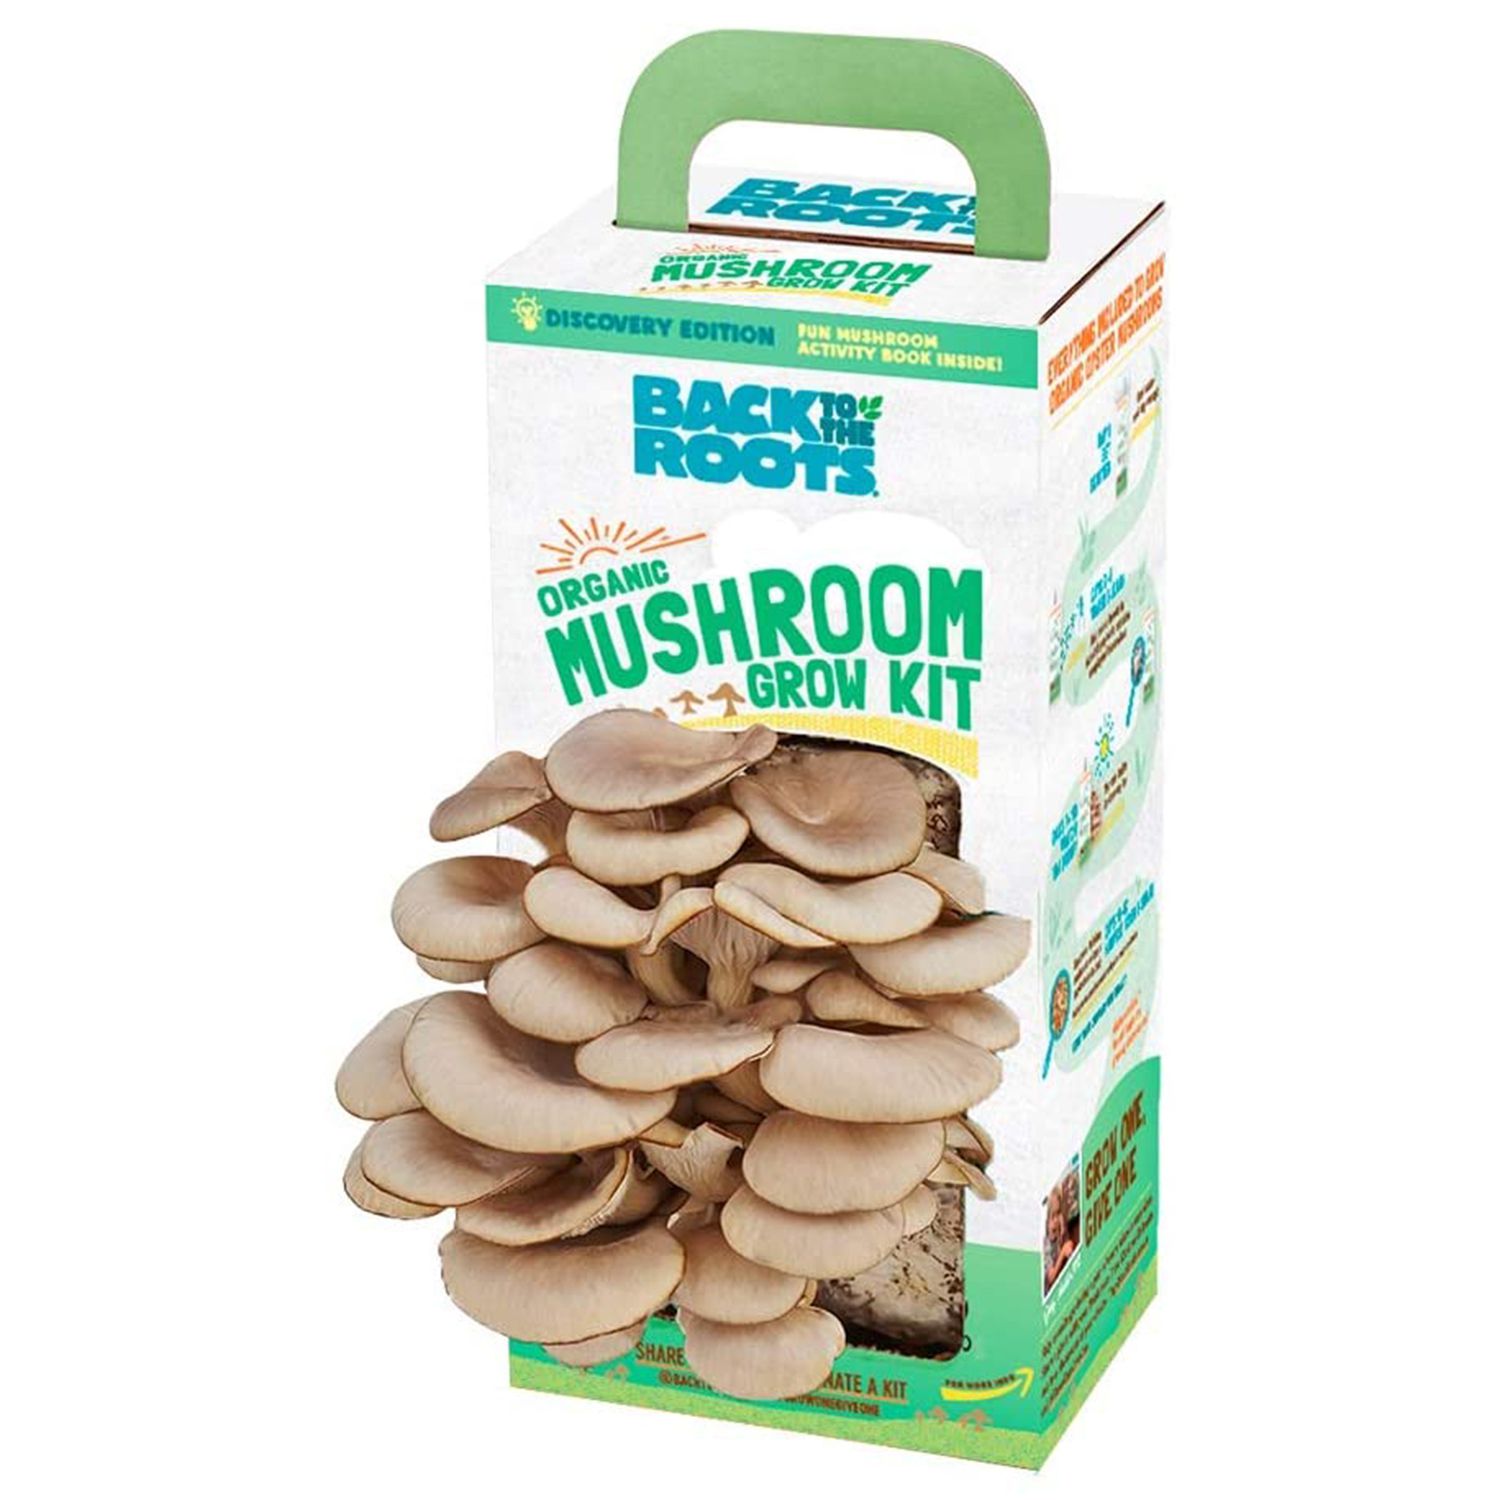 Back to the Roots Organic Mushroom Growing Kit, Harvest Gourmet Oyster